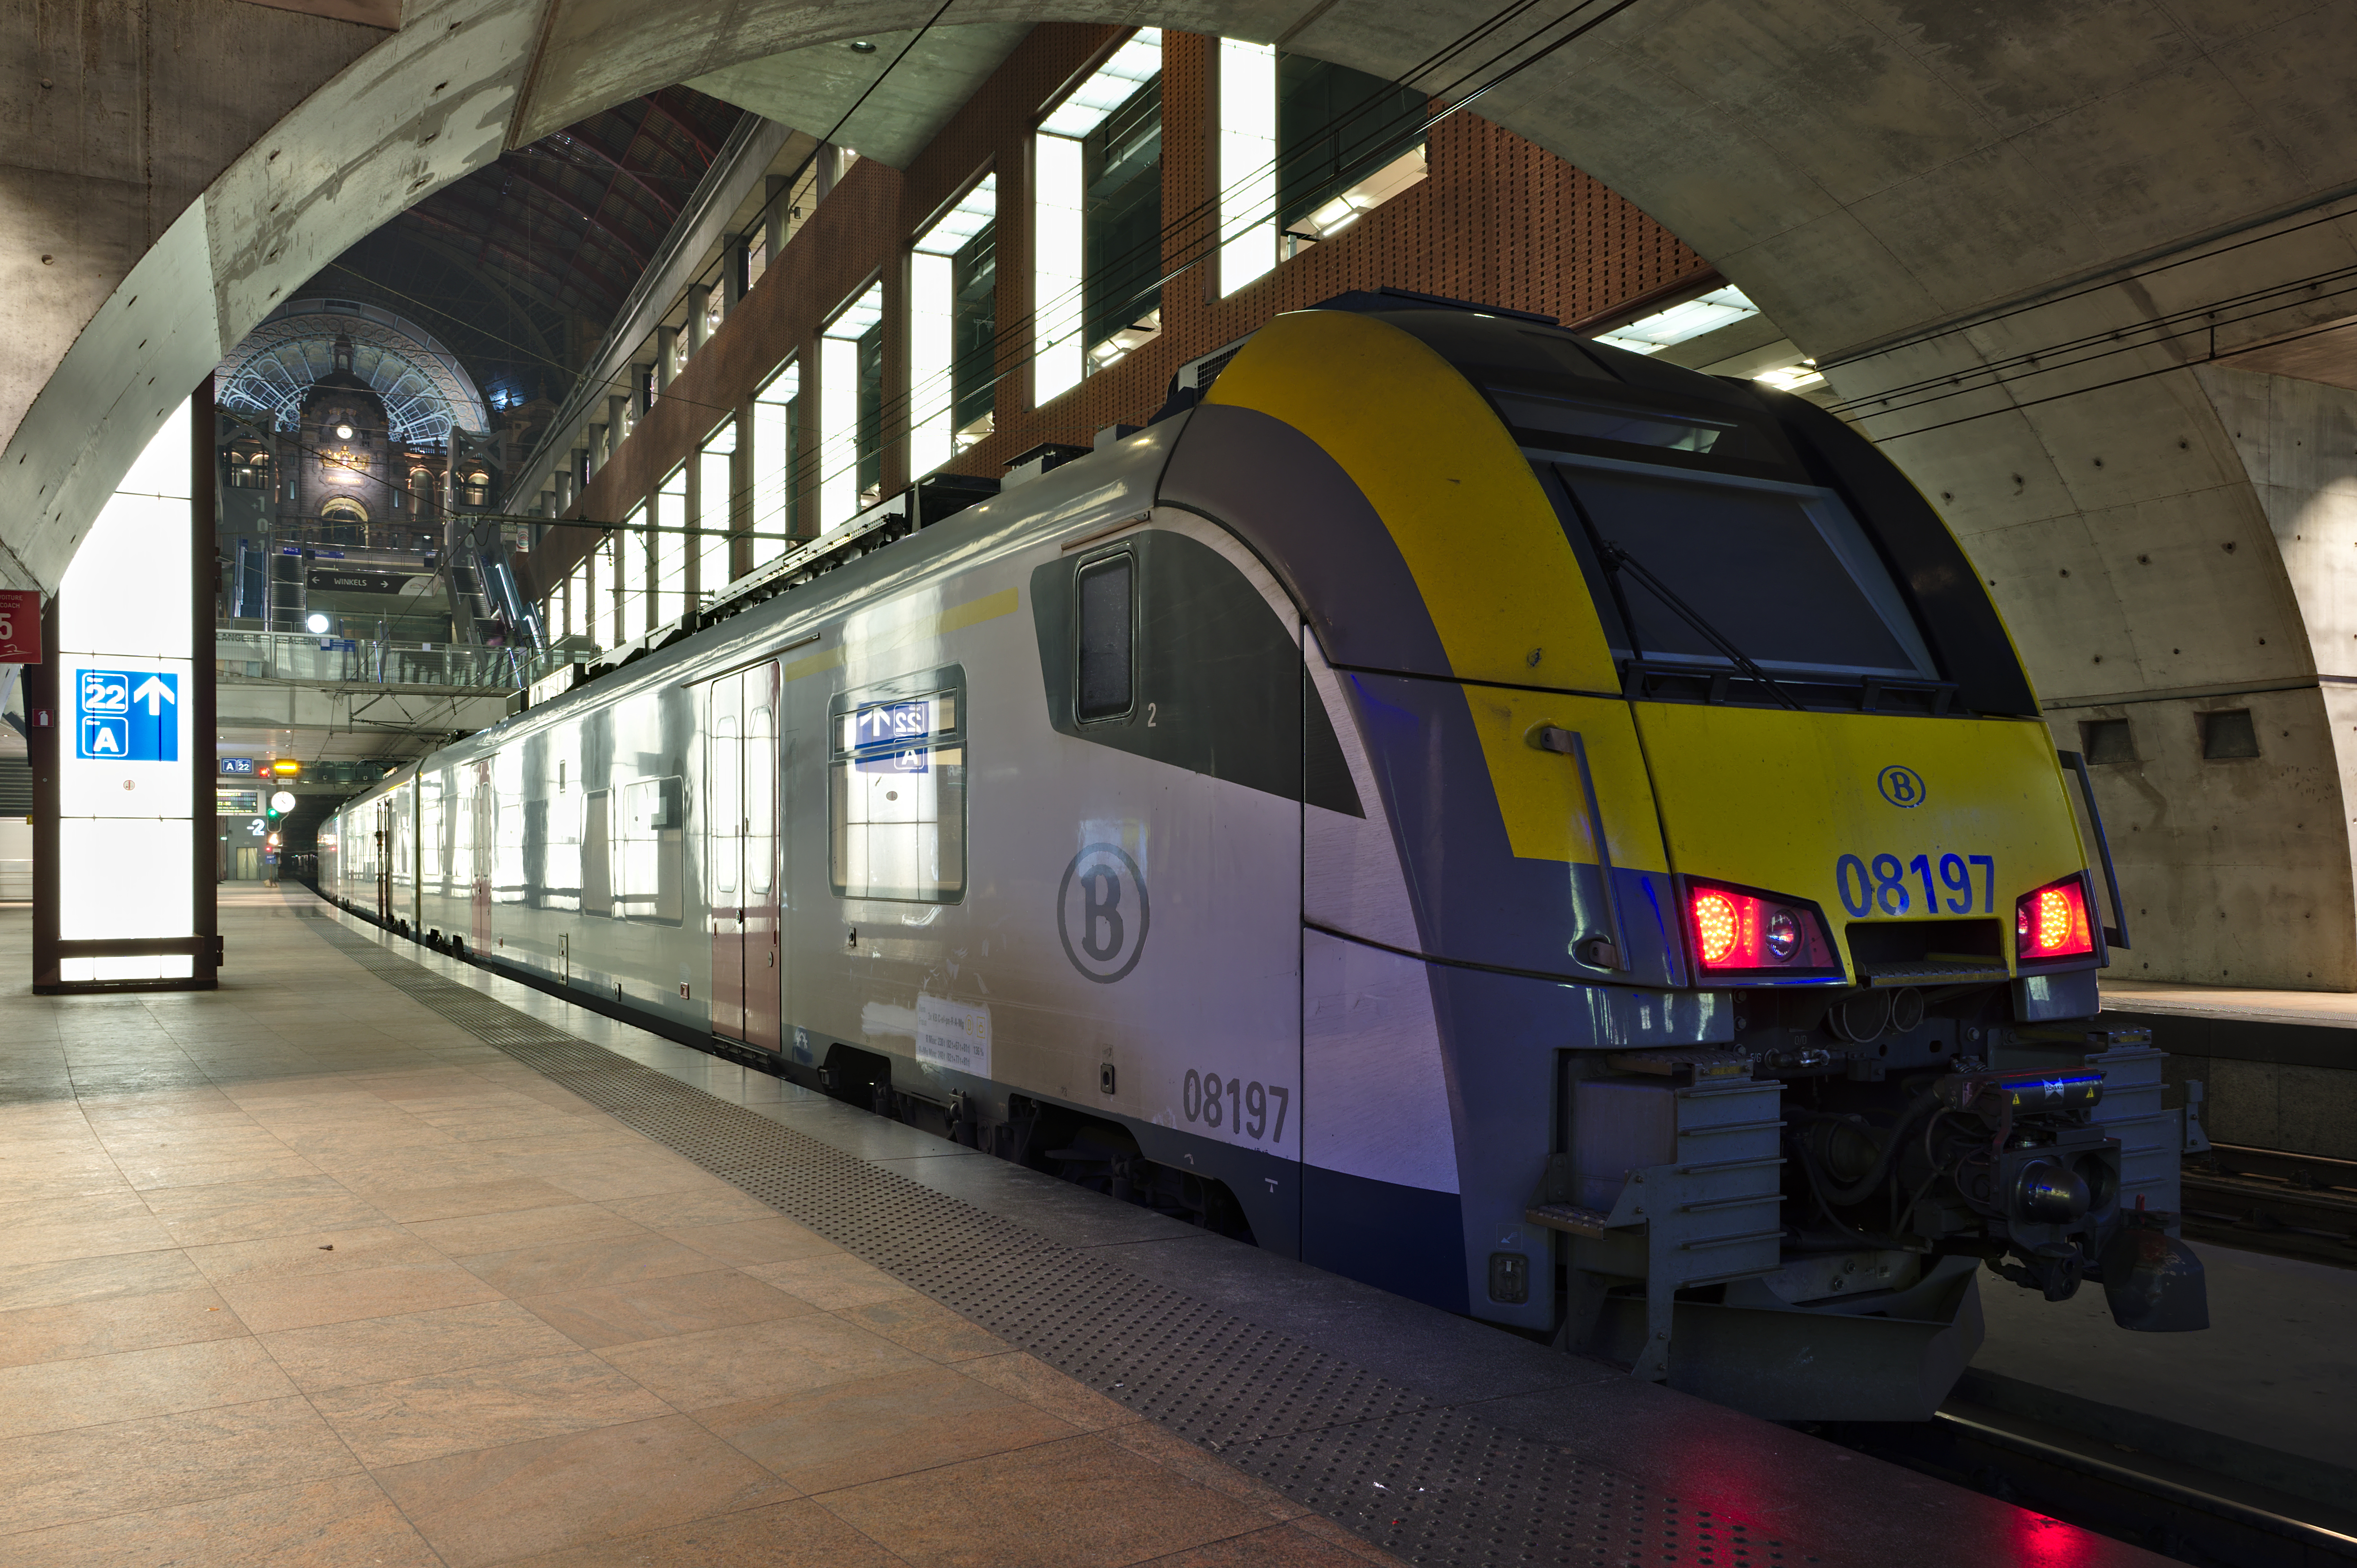 SNCB Desiro ML (Class AM08 08197) at Antwerp Central Station level -2 platform 22 looking towards the main hall (DSCF4782)